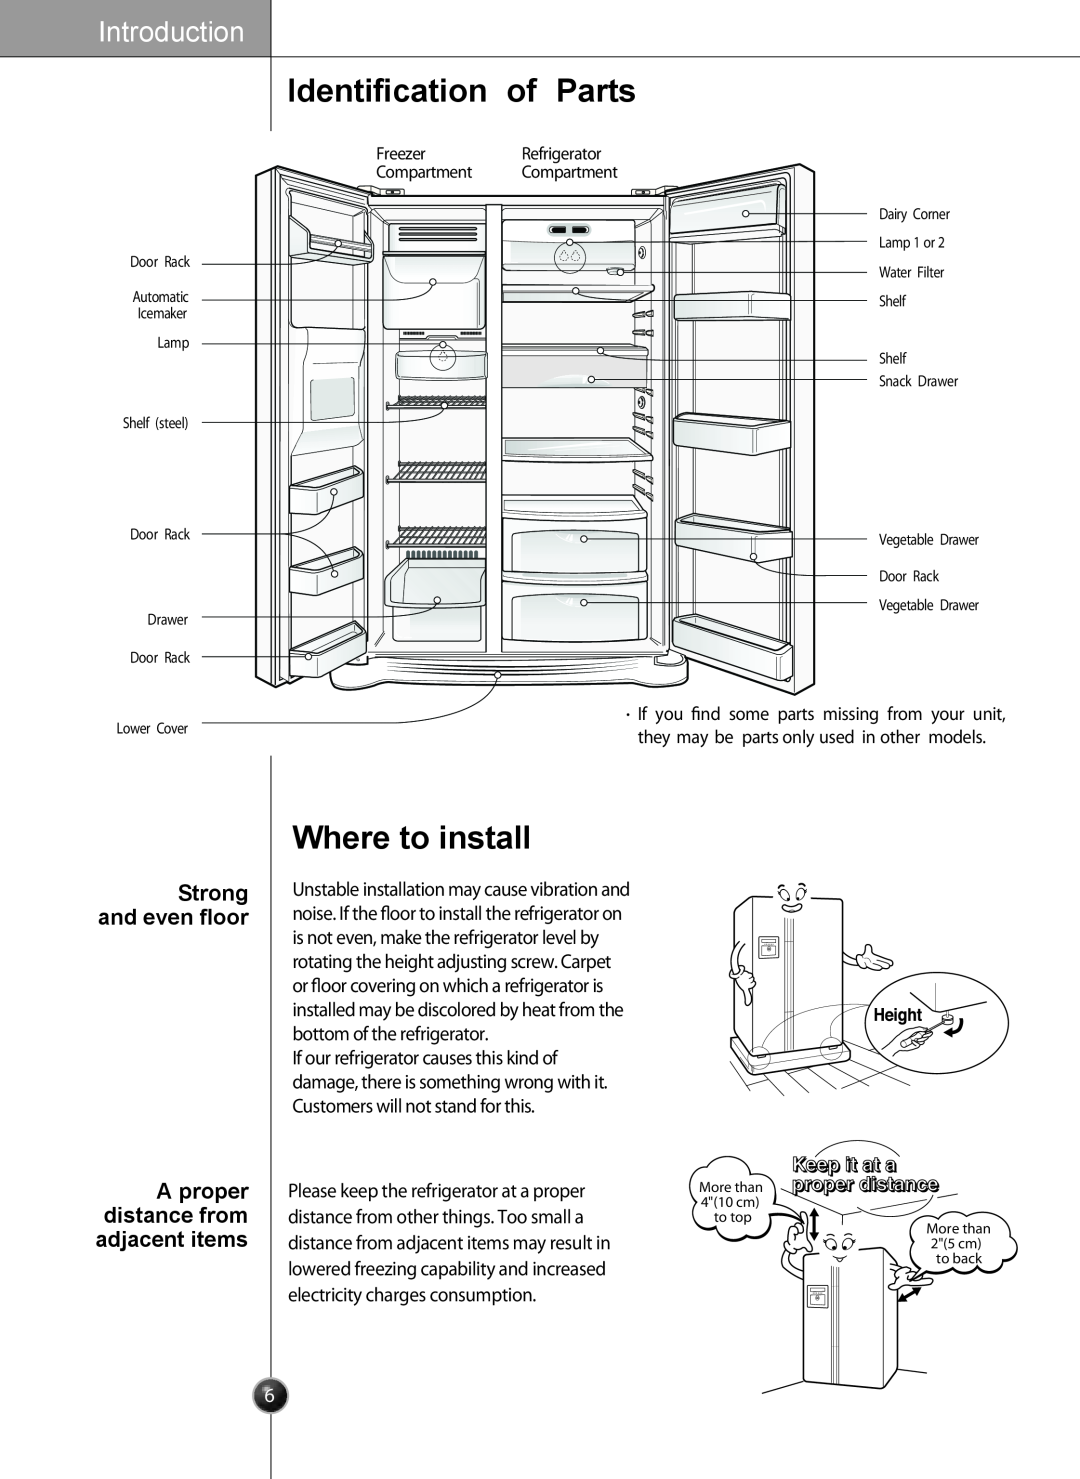 LG Electronics LSC26905 Identiﬁcation of Parts, Where to install, Strong, A proper, distance from, adjacent items, Freezer 